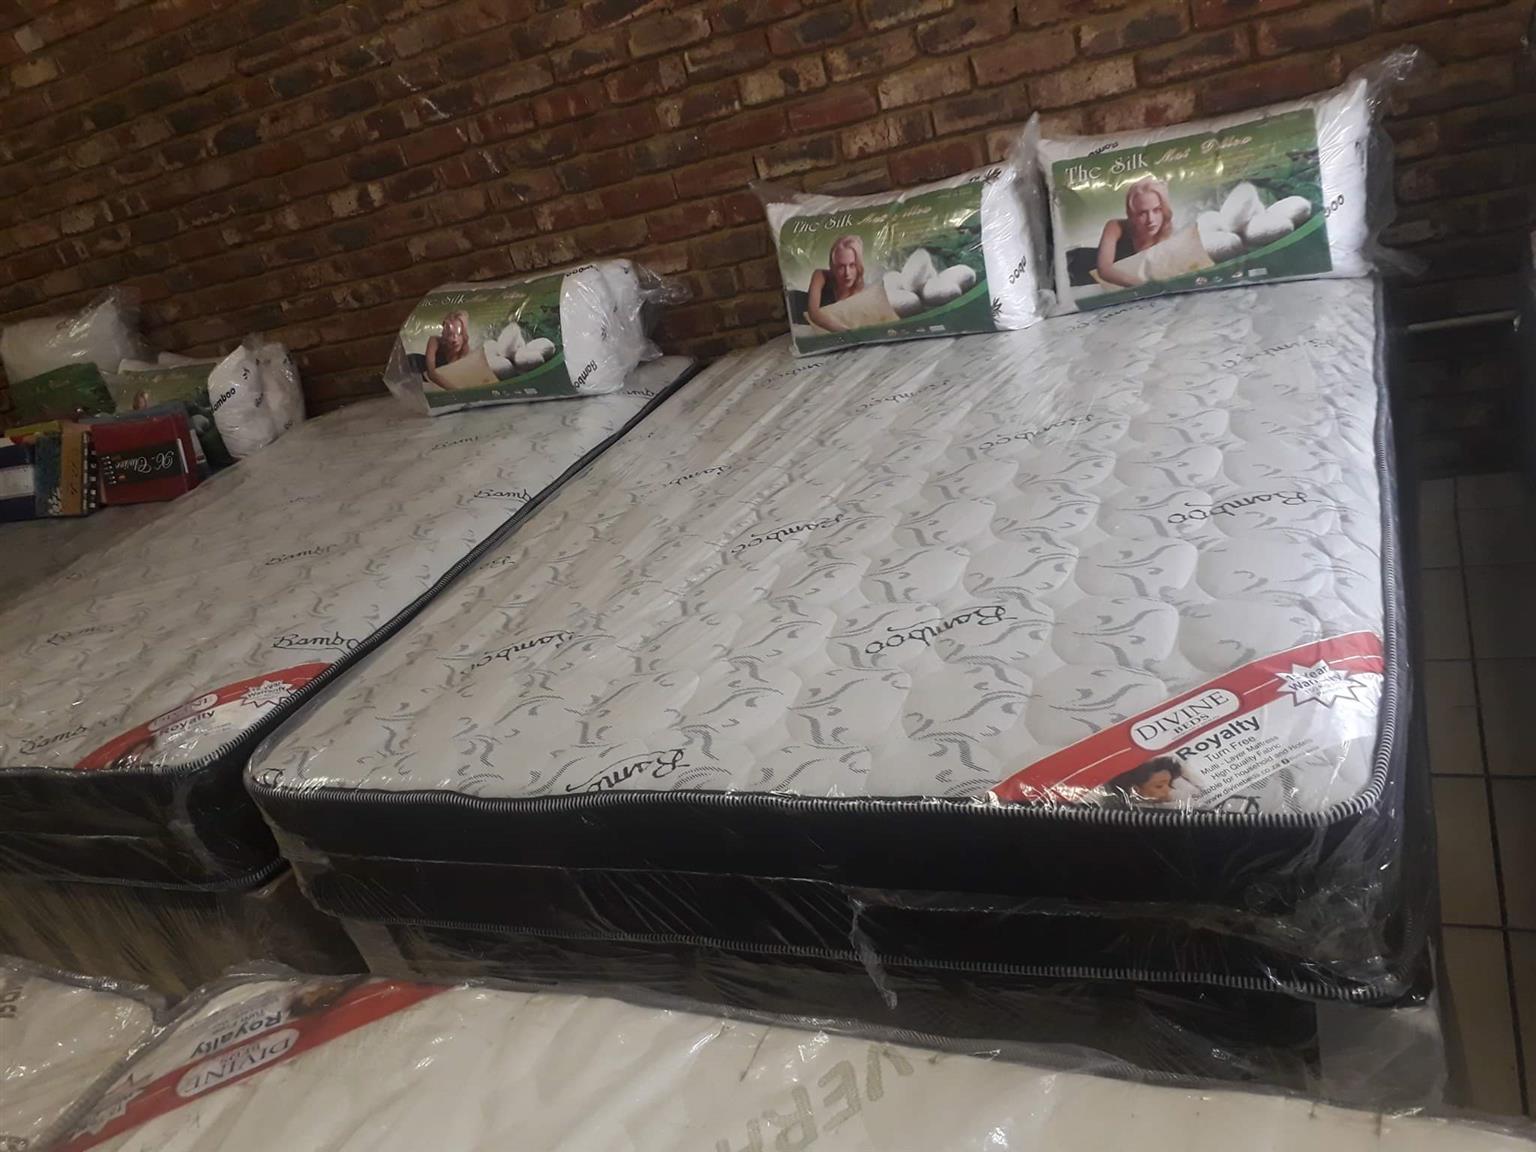 Bamboo beds, Foam beds, Budget beds, Eurotop on special 